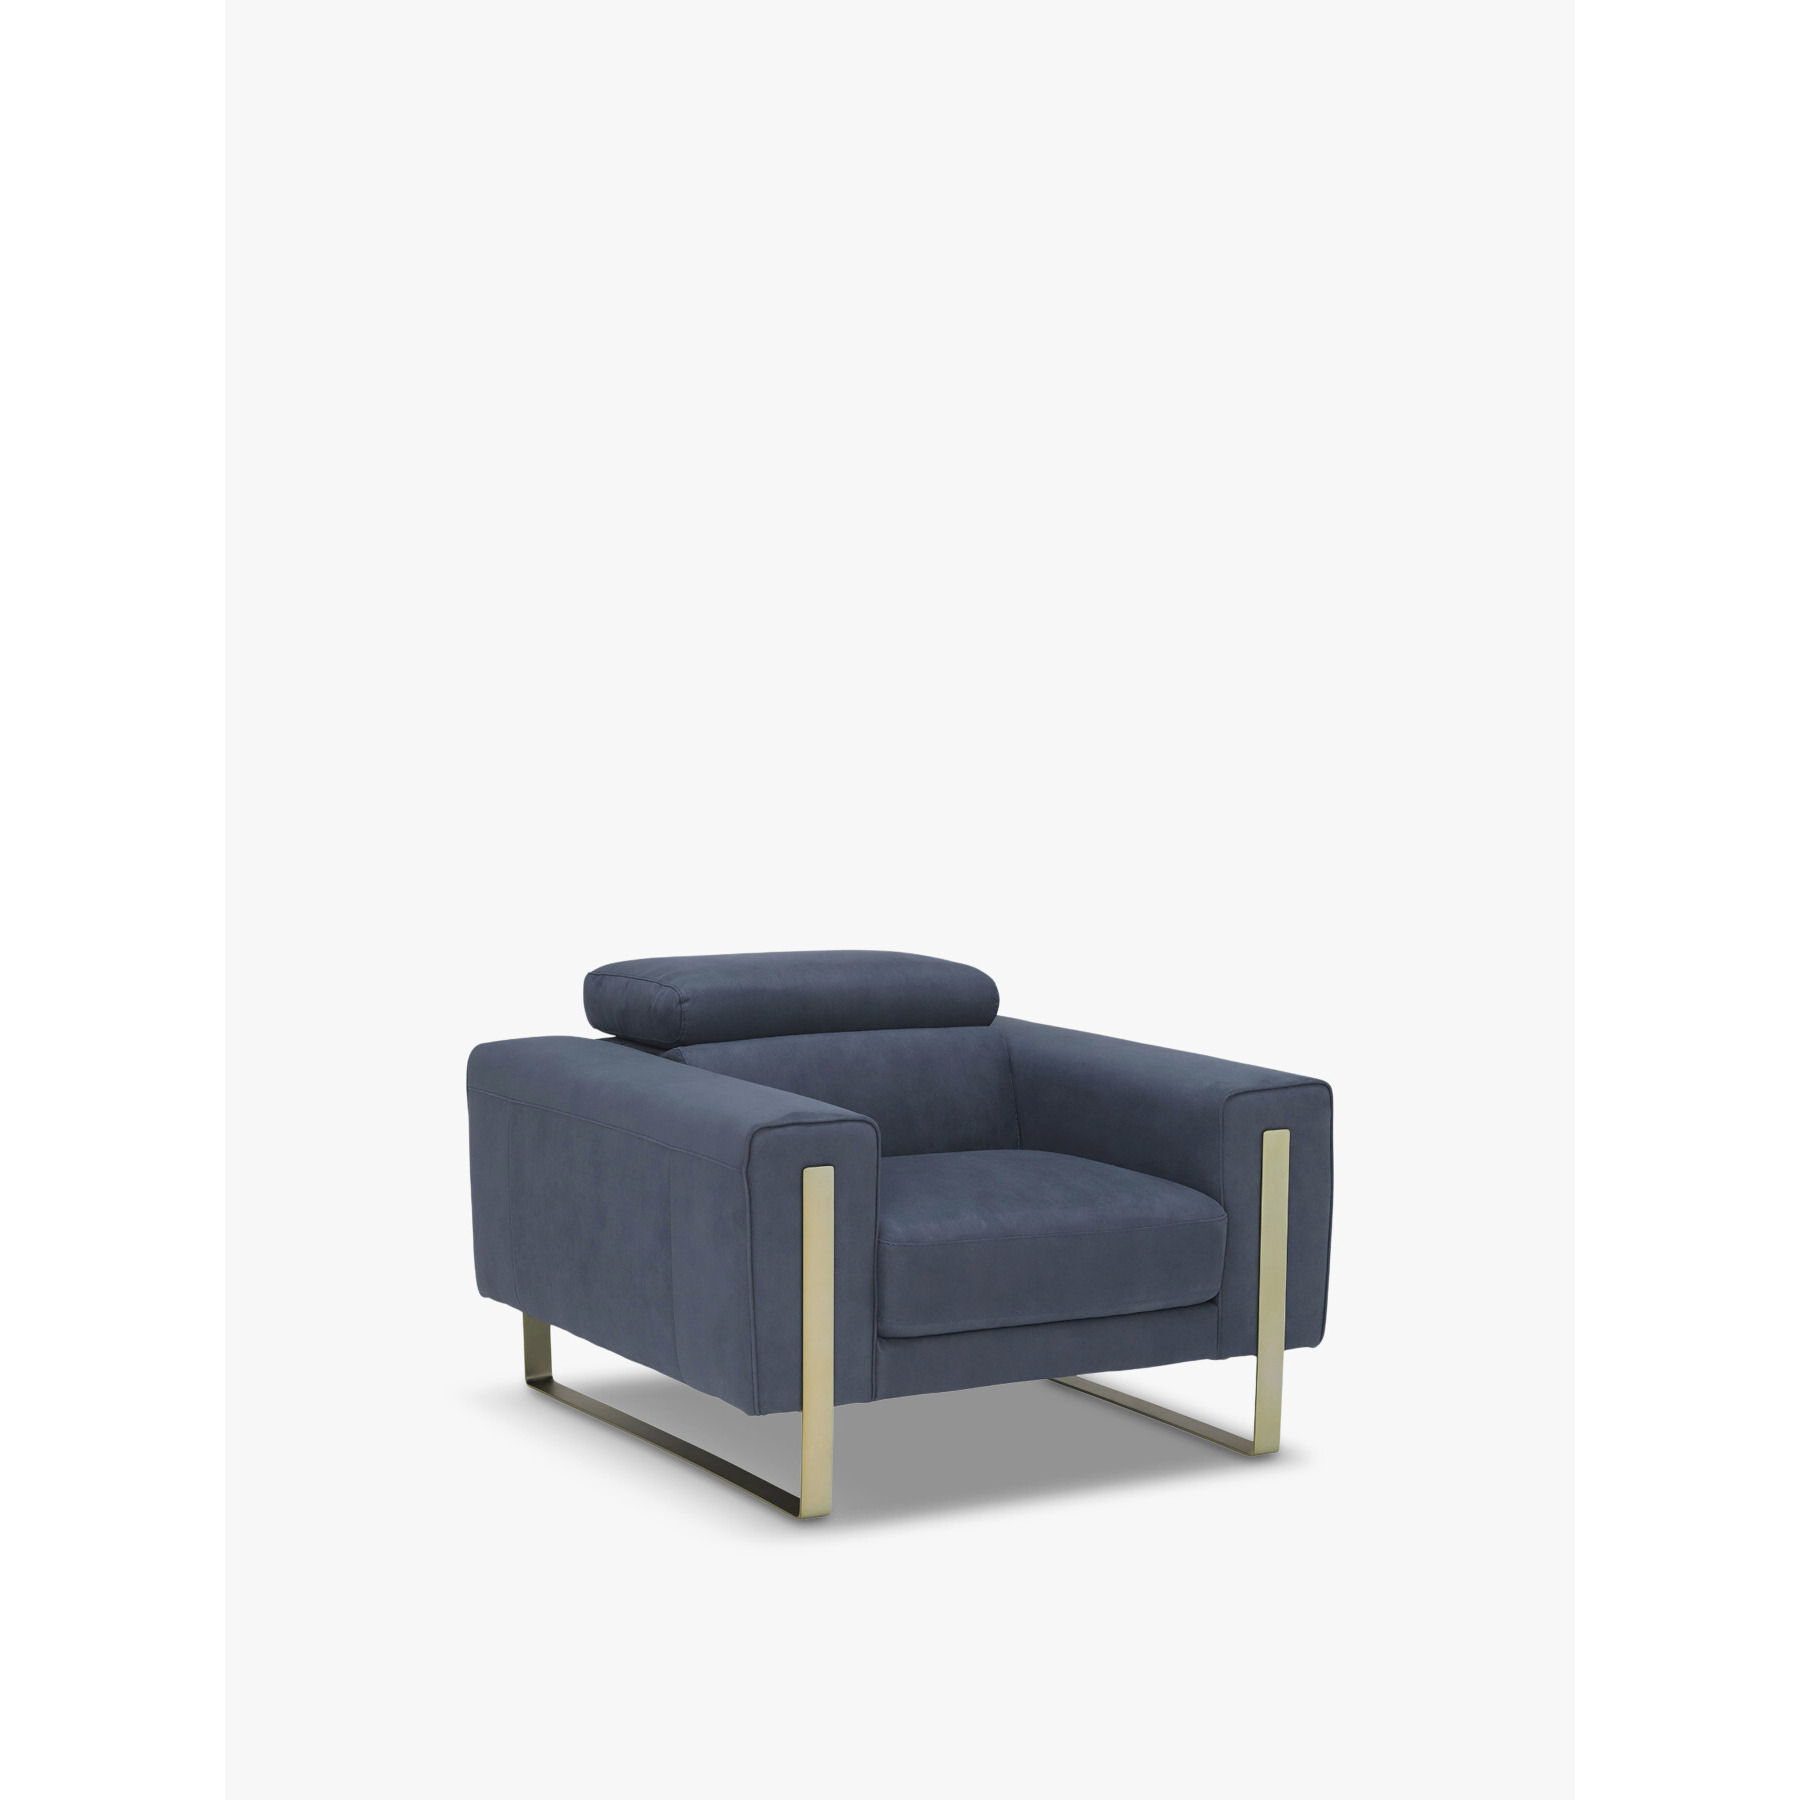 Barker and Stonehouse Milan Armchair, Cashmere Ocean Blue - image 1